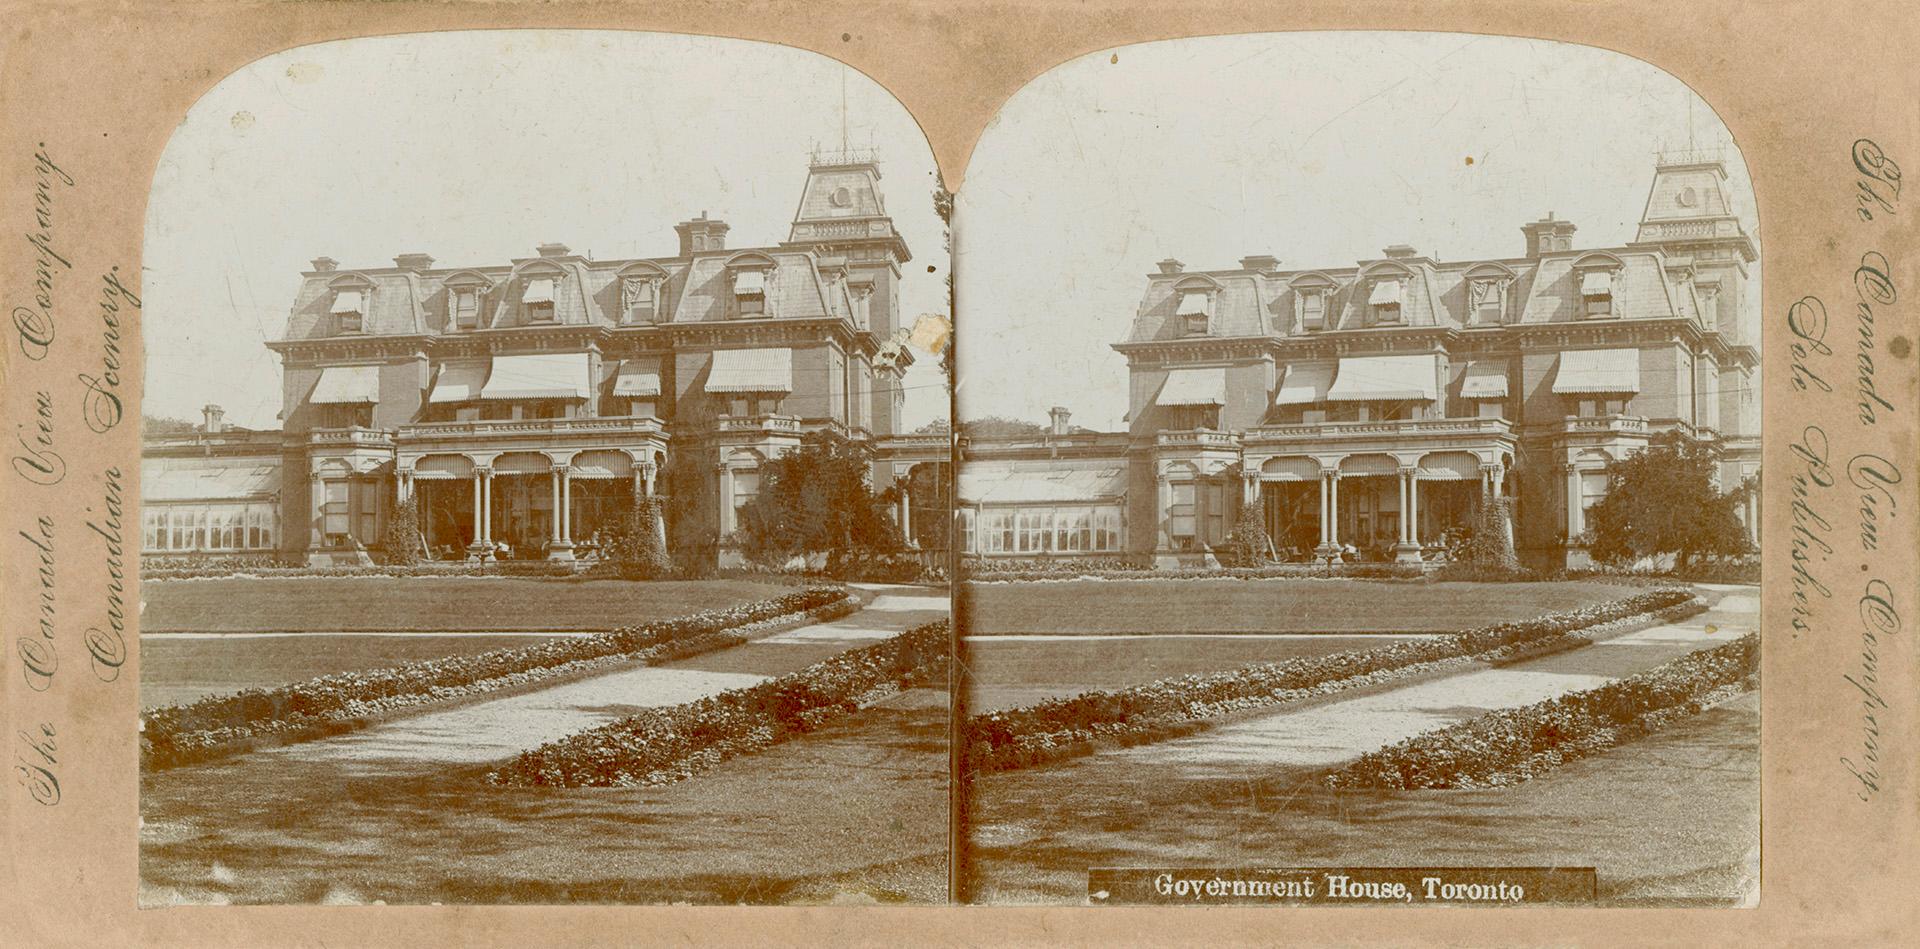 Pictures show a huge three story house in the Second Empire style.